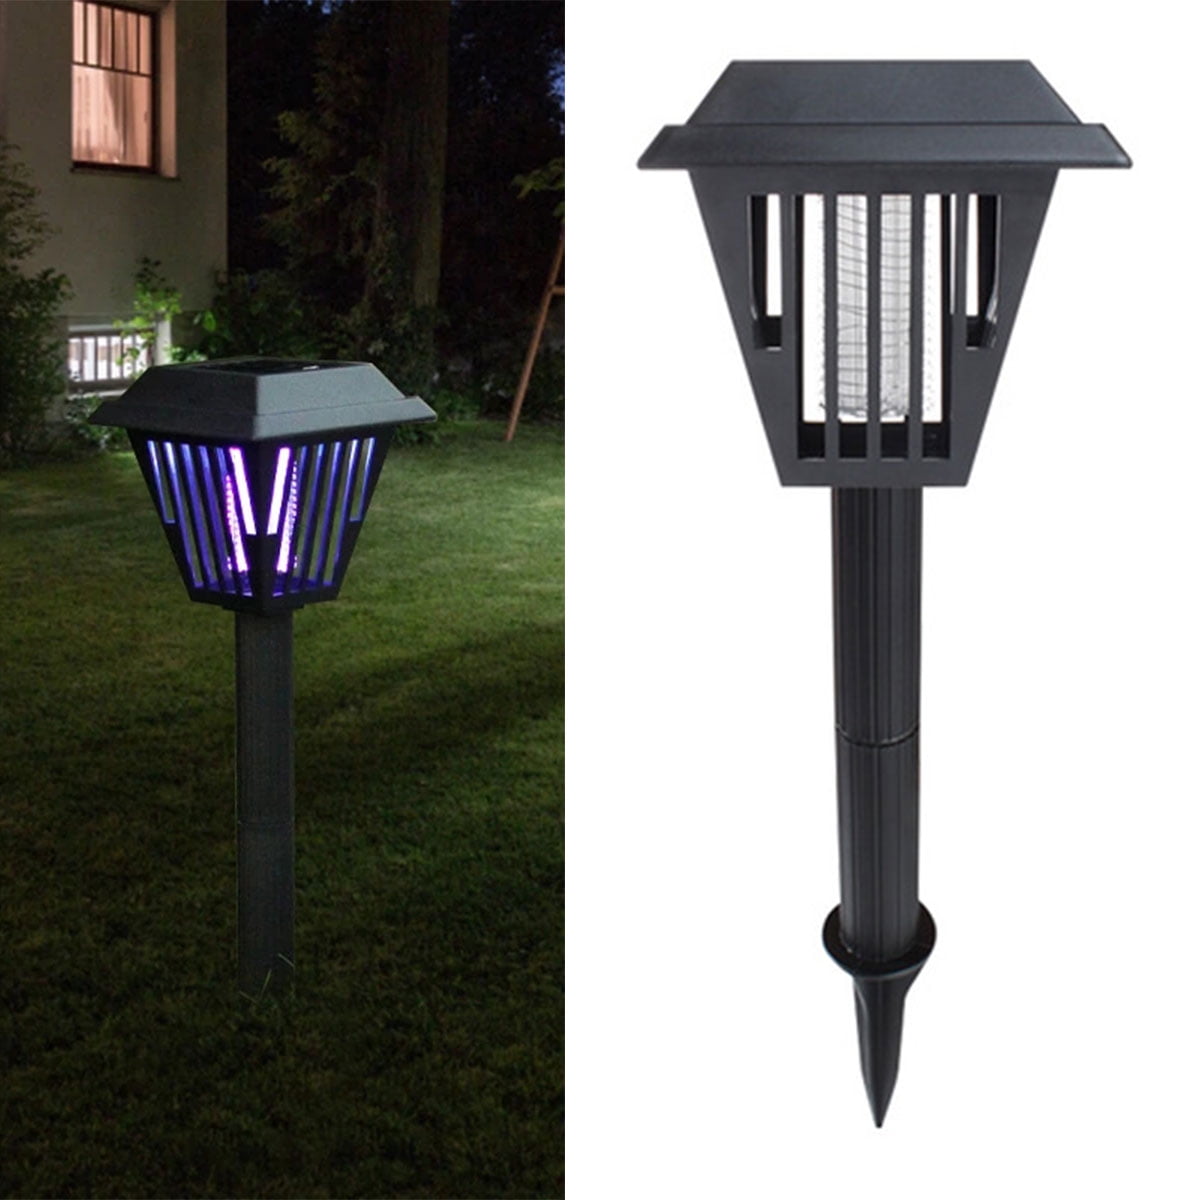 Solar Powered Wall Mounted Light Plastic Black Garden Lawn for Mos_Quito 